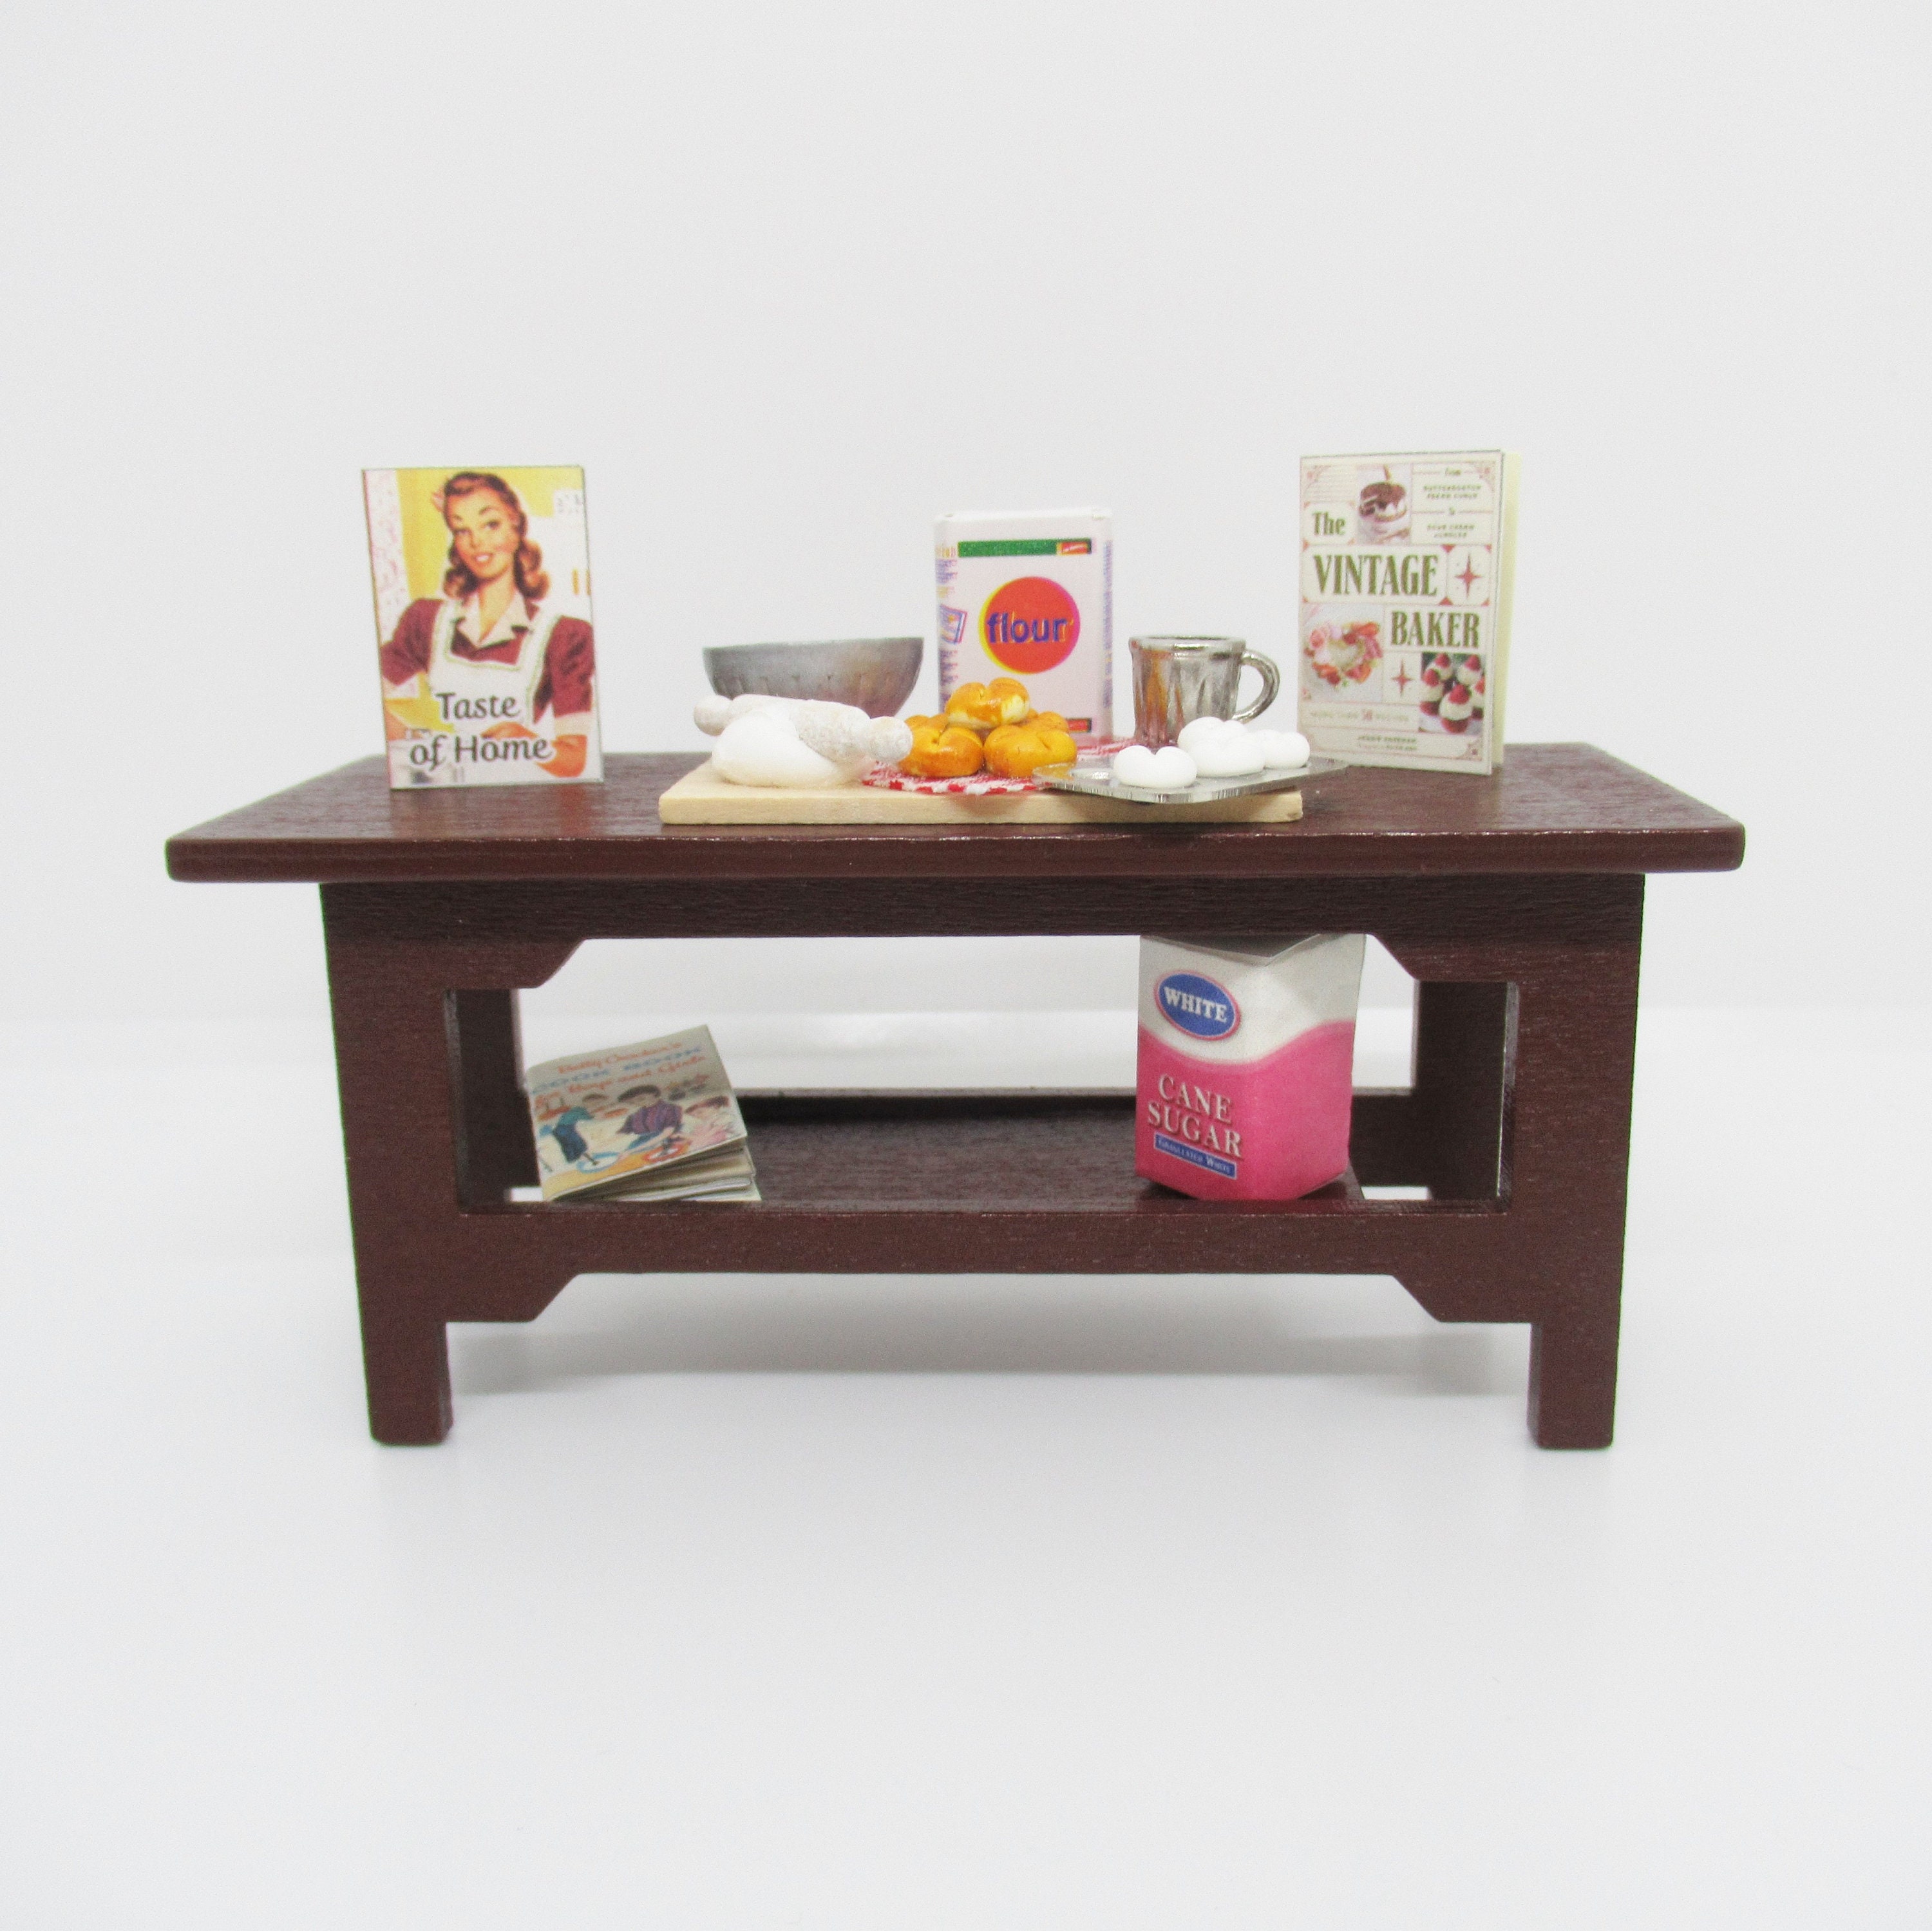 Miniature Baking Table With Cook Books & Essentials